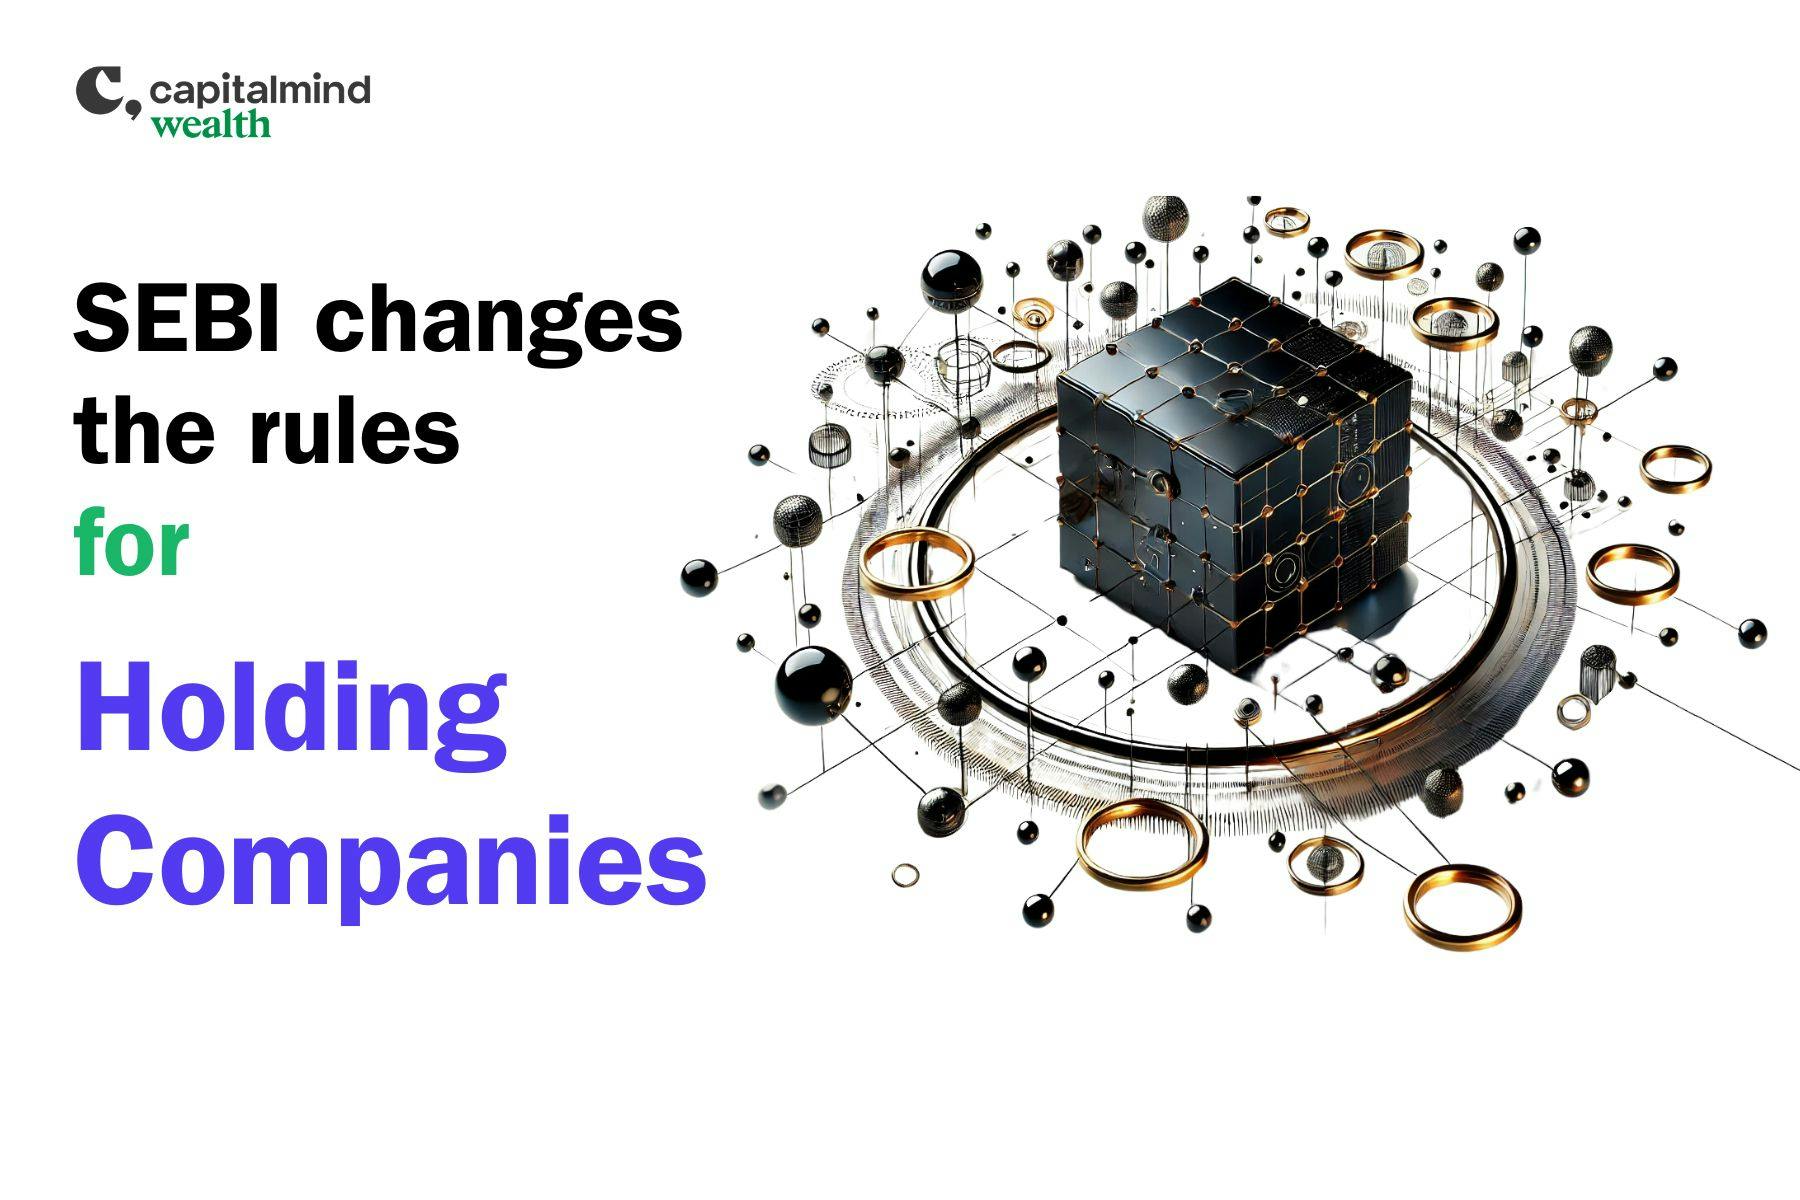 Will changing regulations solve the underpricing of holding companies?